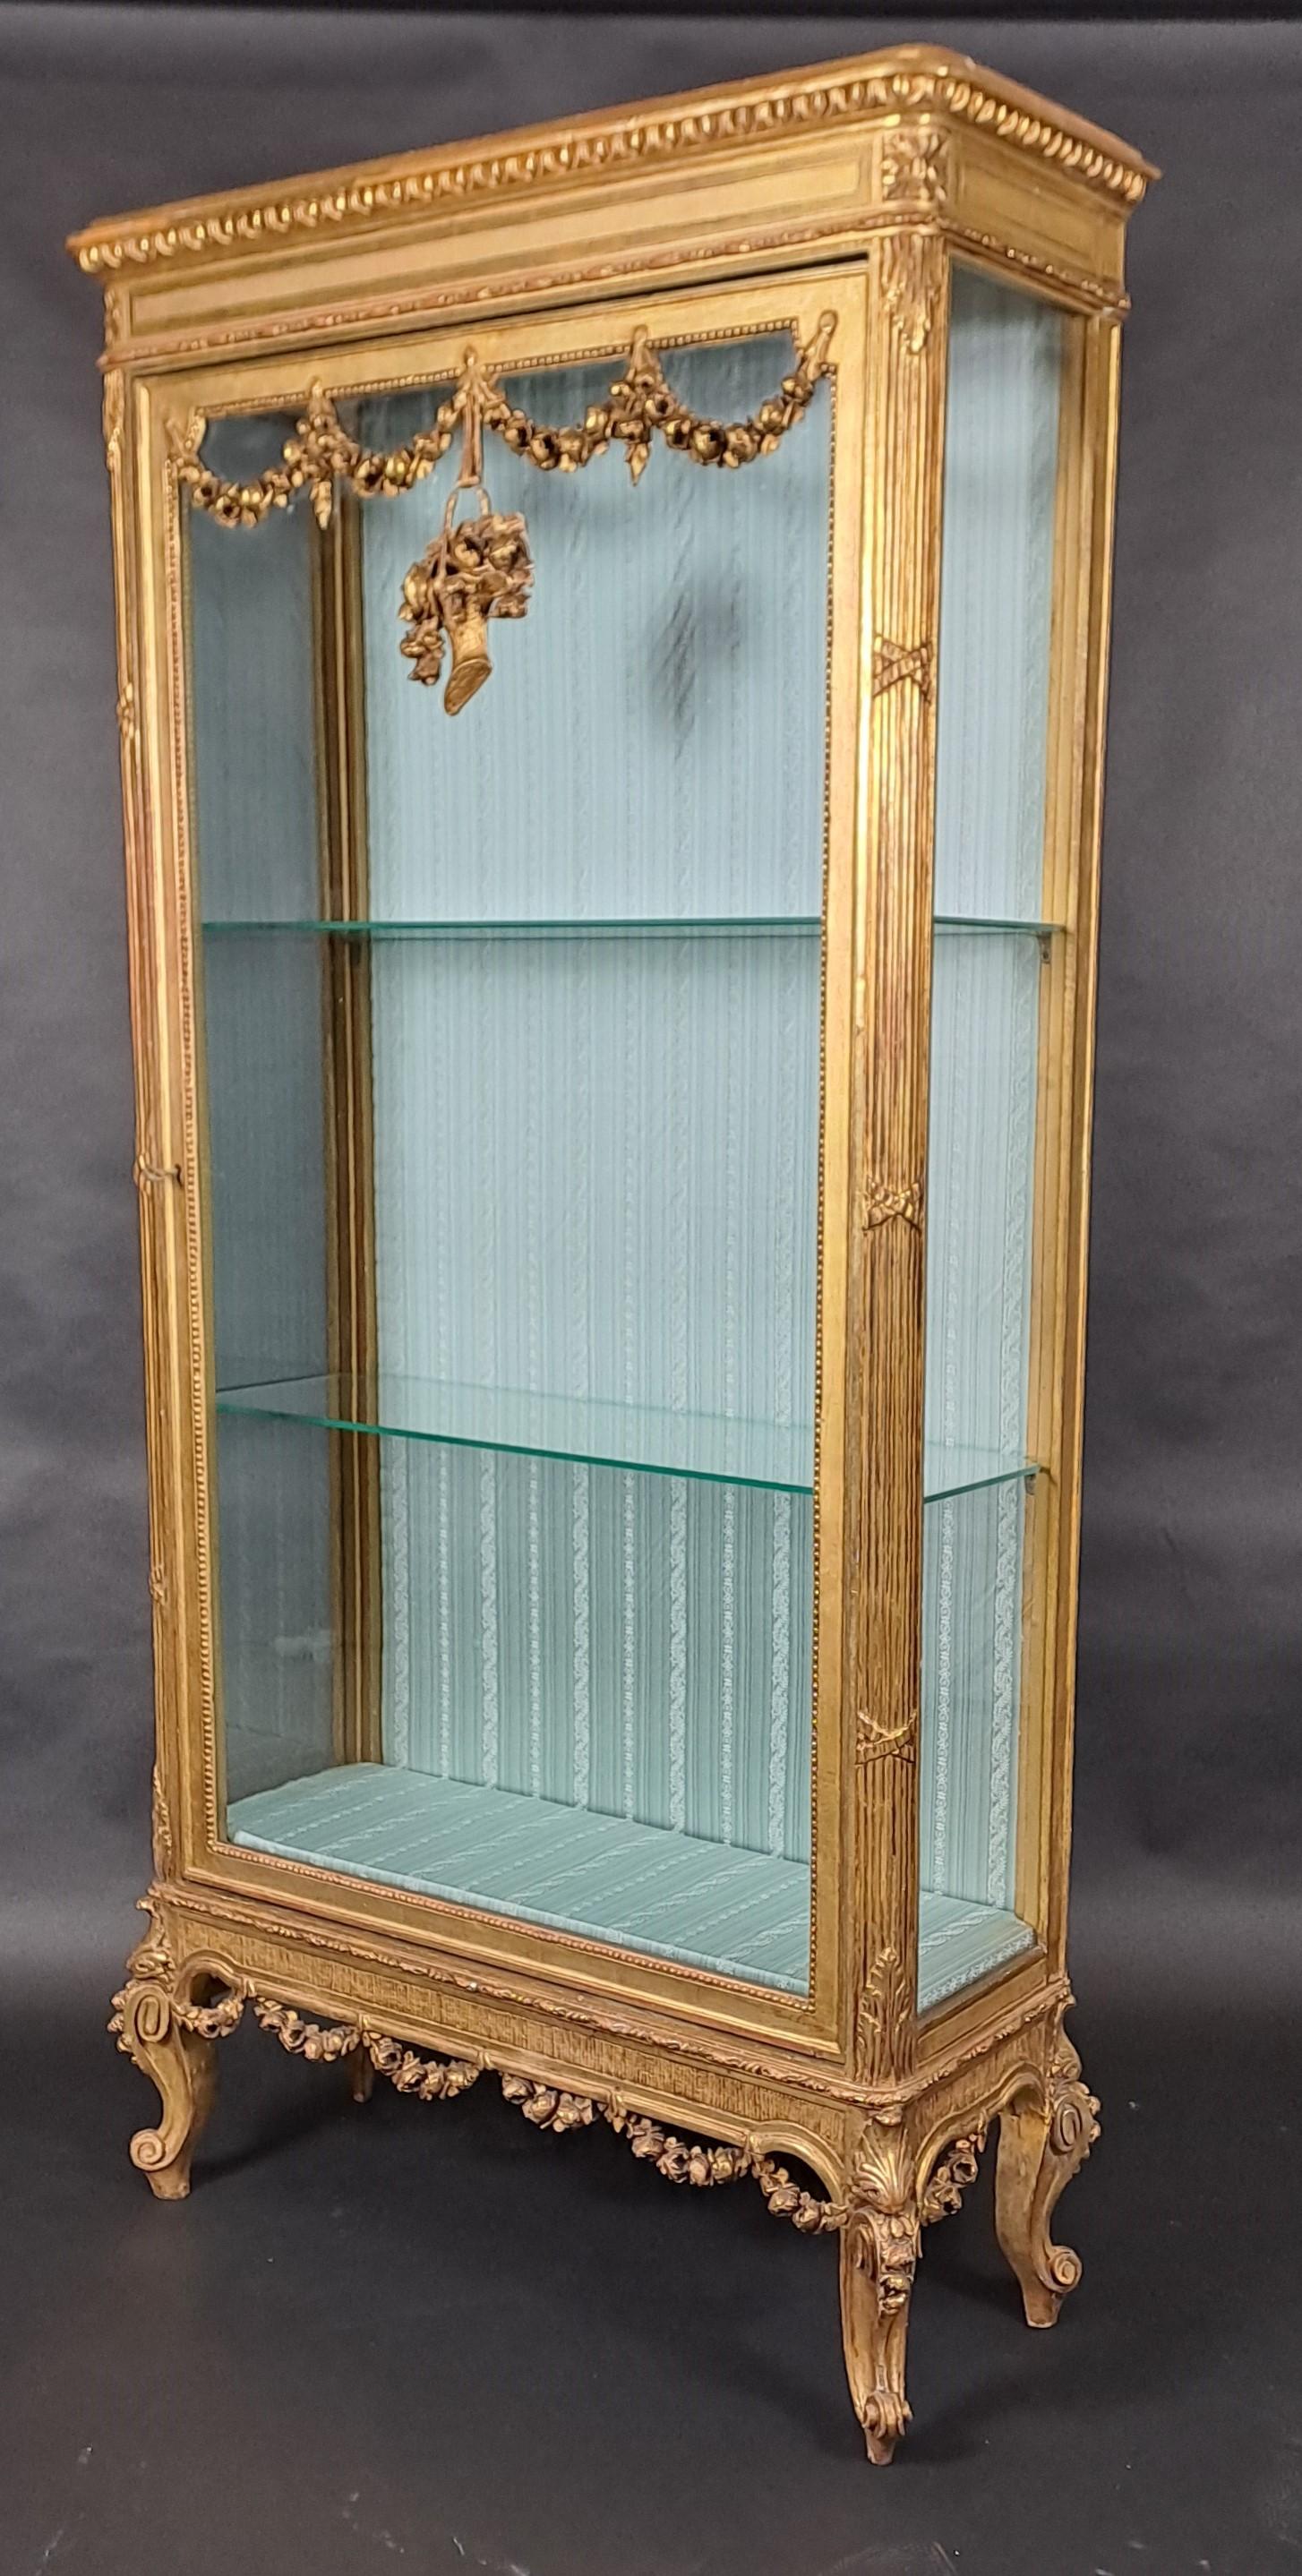 Gilt Transition Style Vitrine In Golden Wood From The 19th Century For Sale